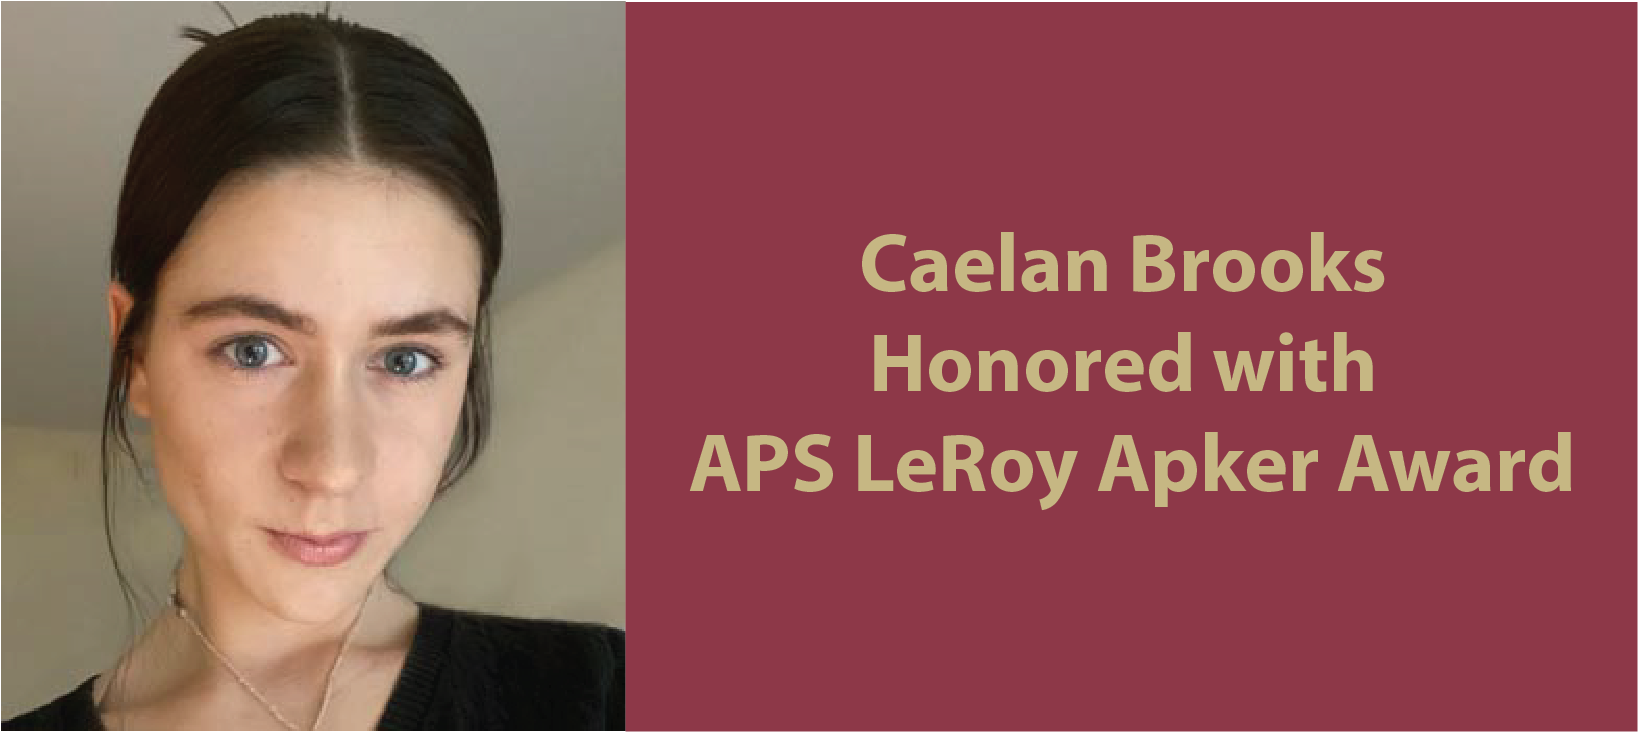 Headshot of Caleen Brooks with graphical text "Caelan Brooks honored with APS LeRoy Apker Award"